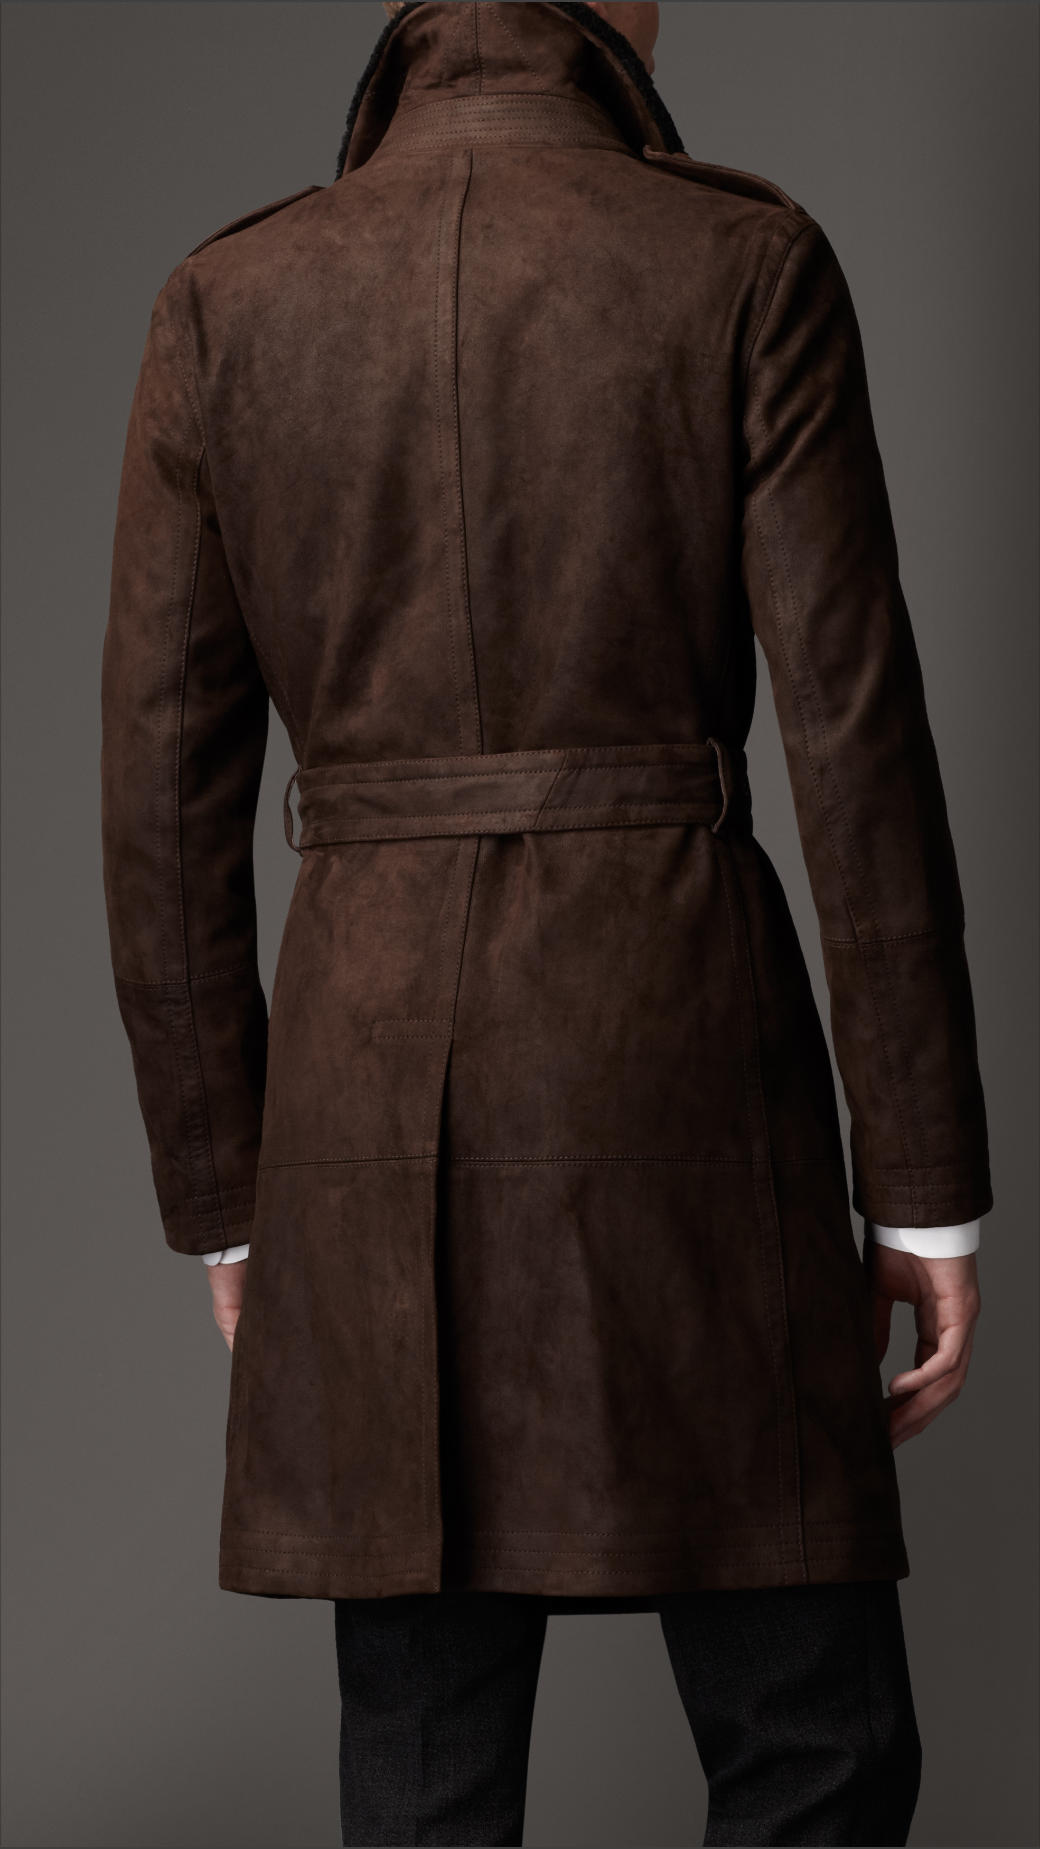 Lyst - Burberry Mid-Length Shearling Collar Suede Trench Coat in Brown ...